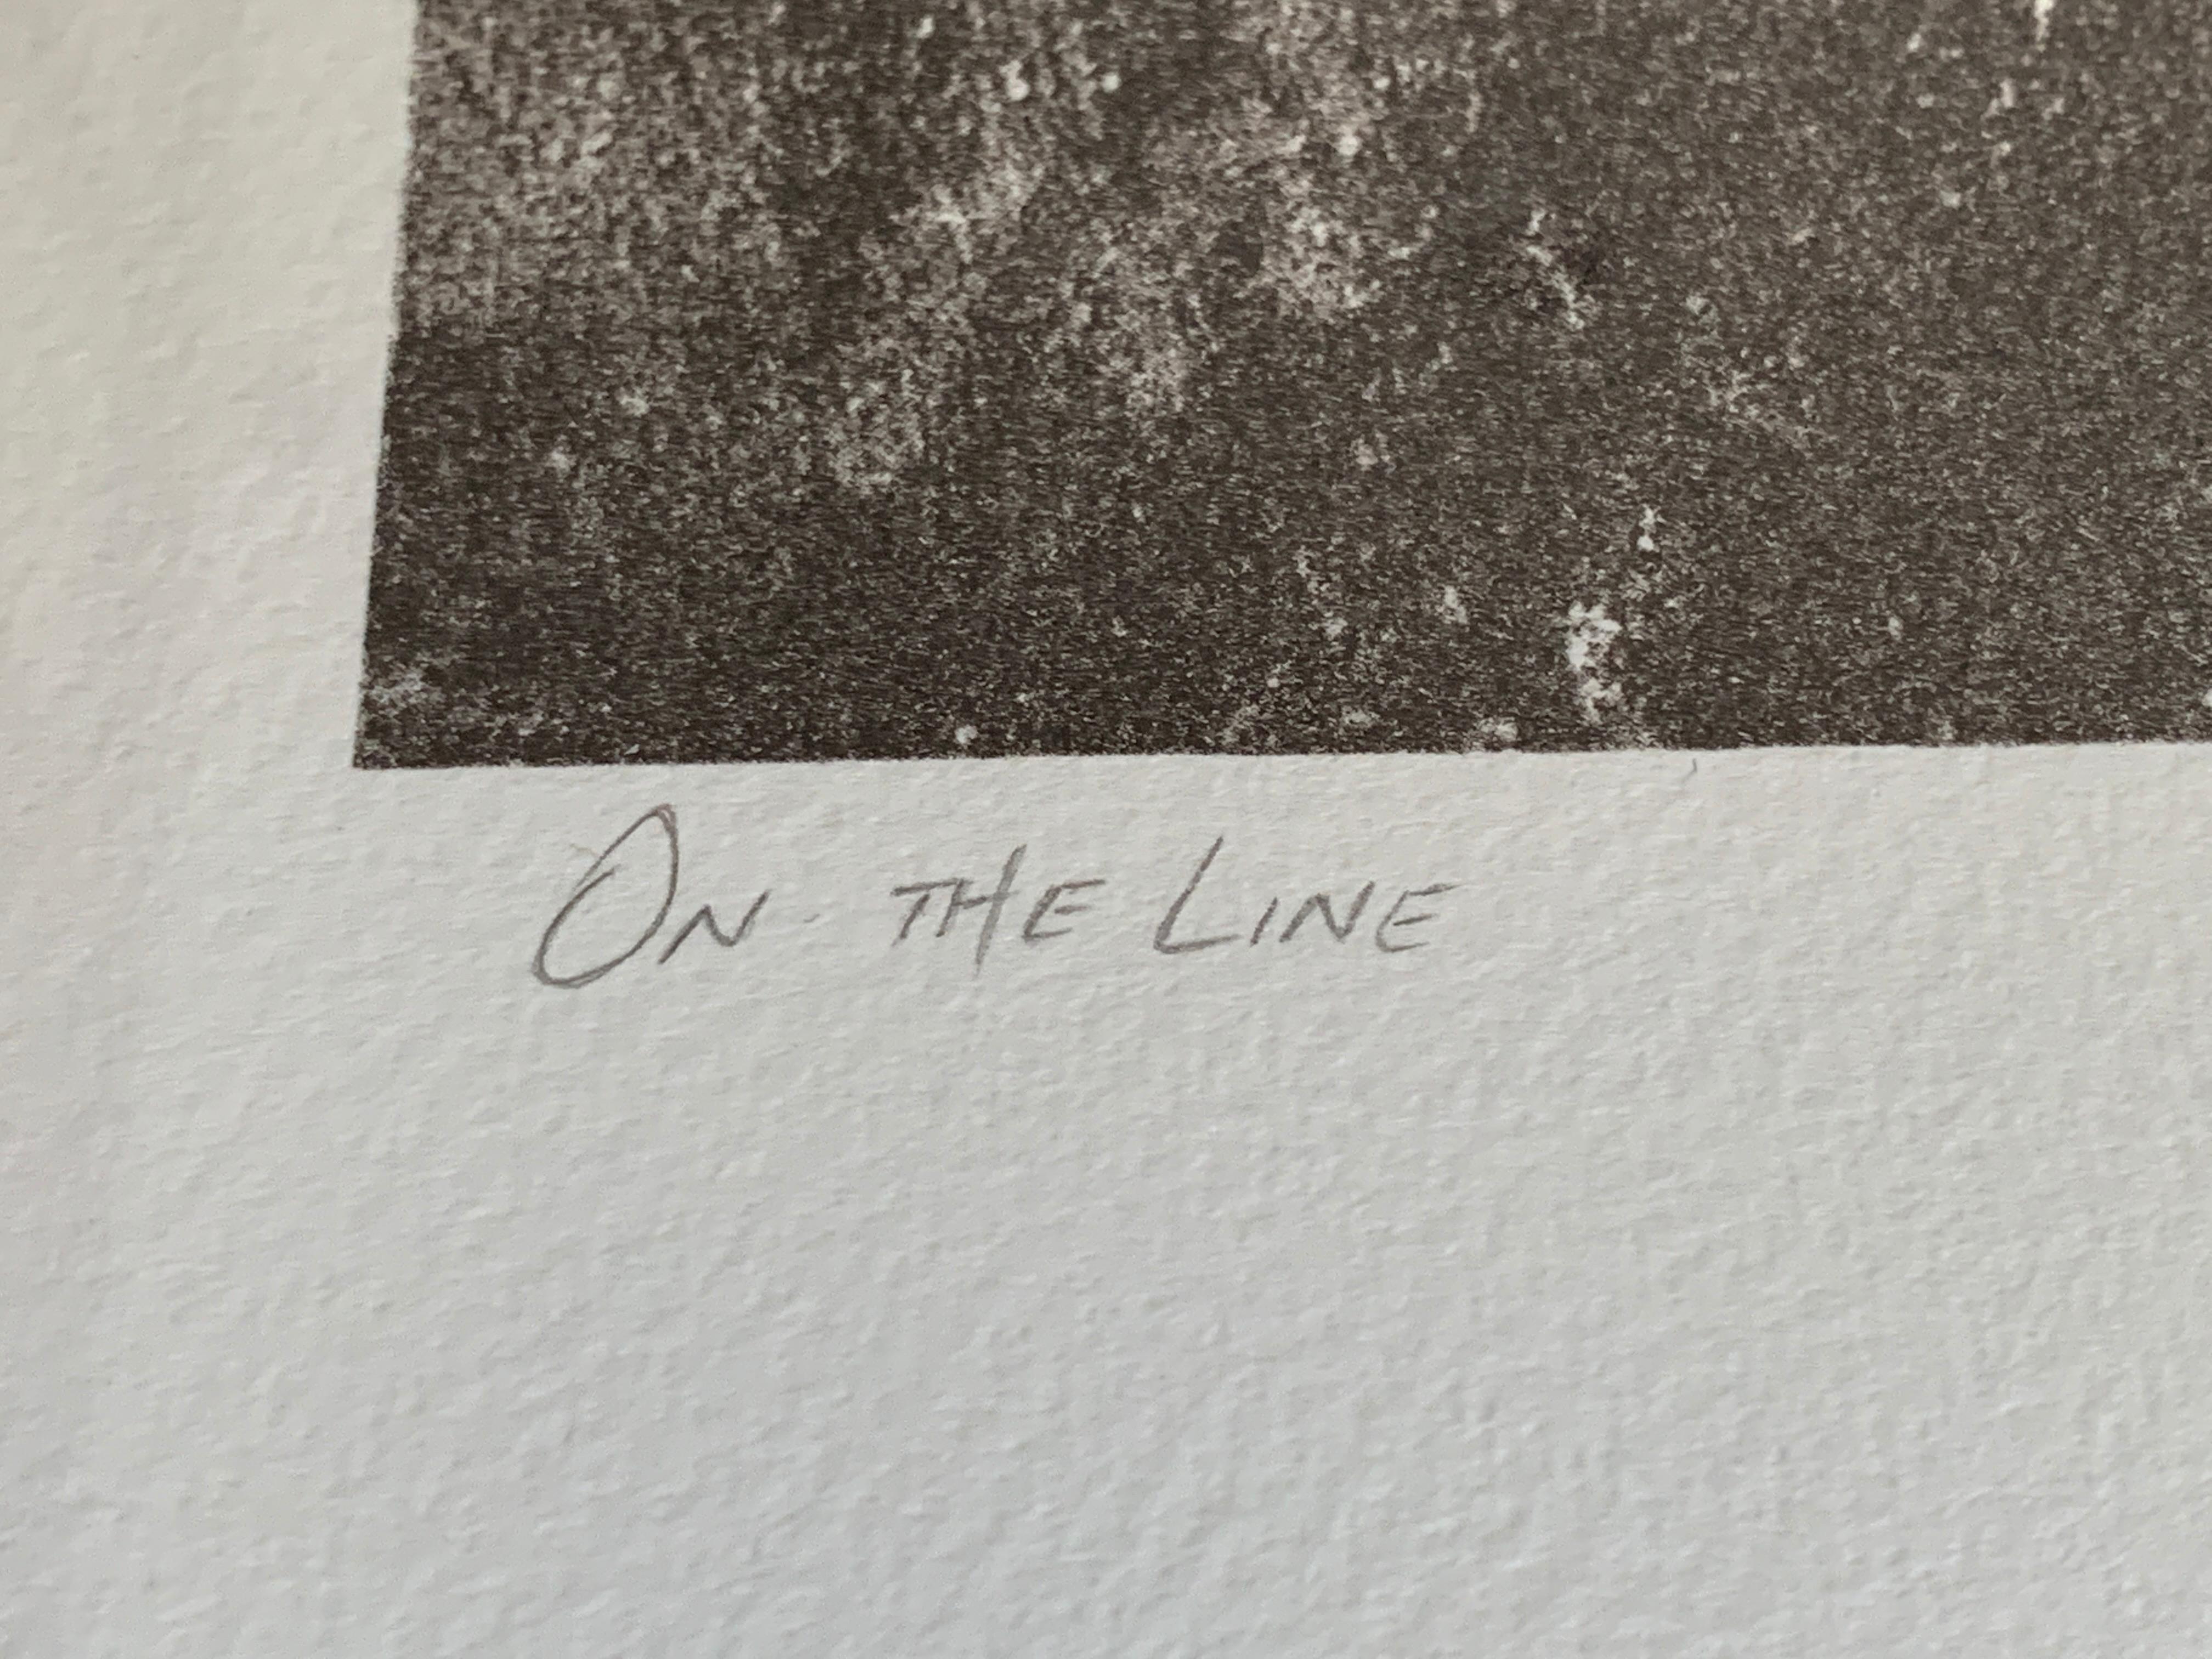 'On the Line' Monoprint Lithograph by Laurie Carnohan, 2013 5